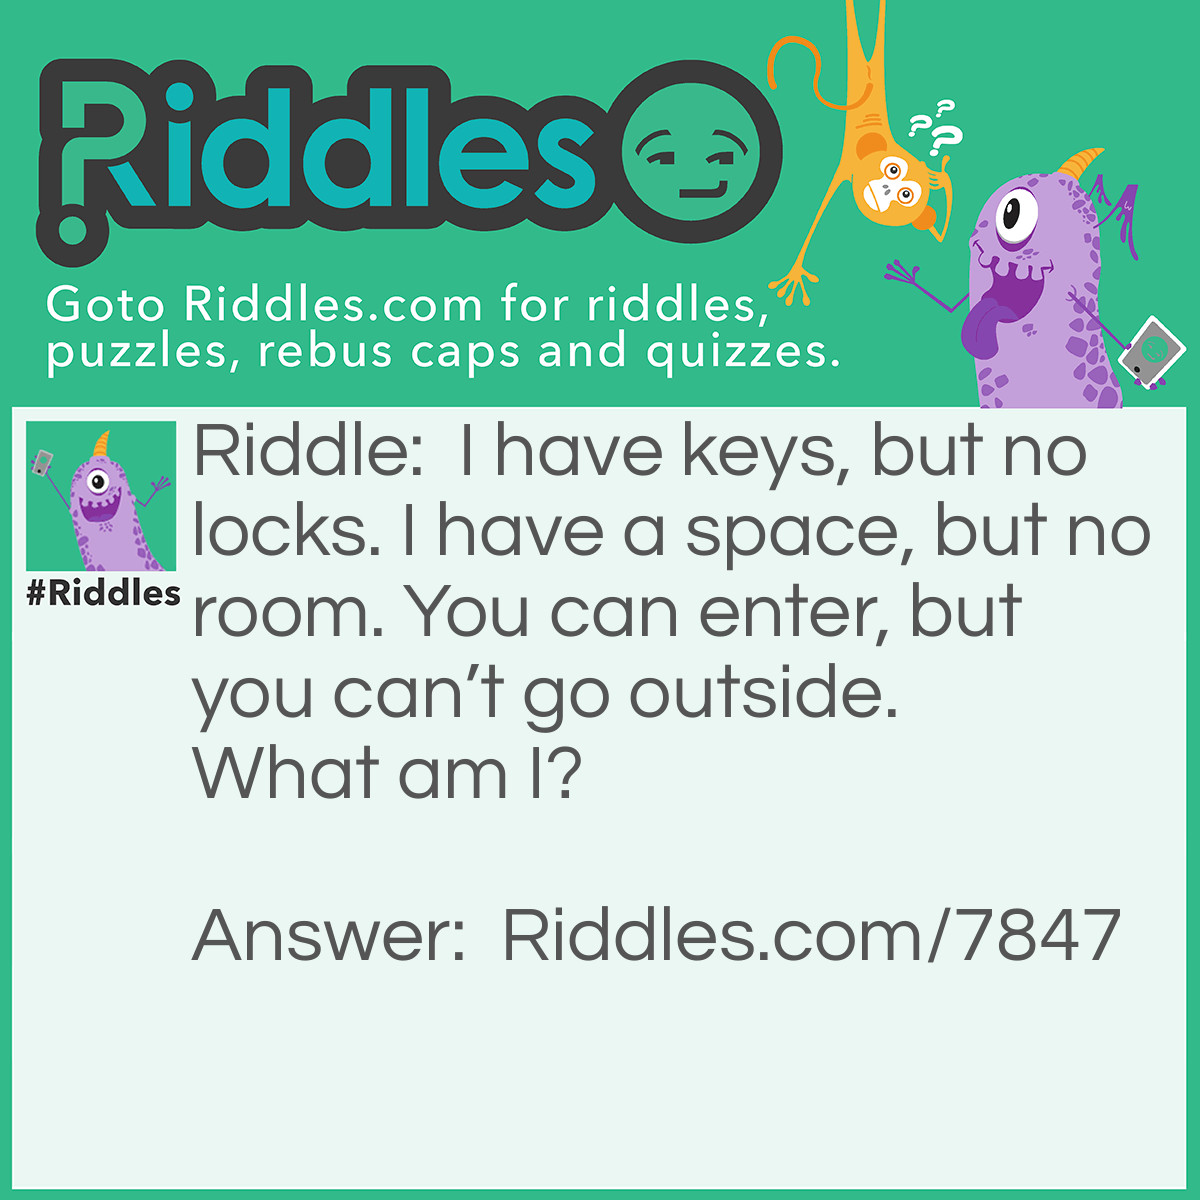 Riddle: I have keys, but no locks. I have a space, but no room. You can enter, but you can't go outside. What am I? Answer: A Keyboard